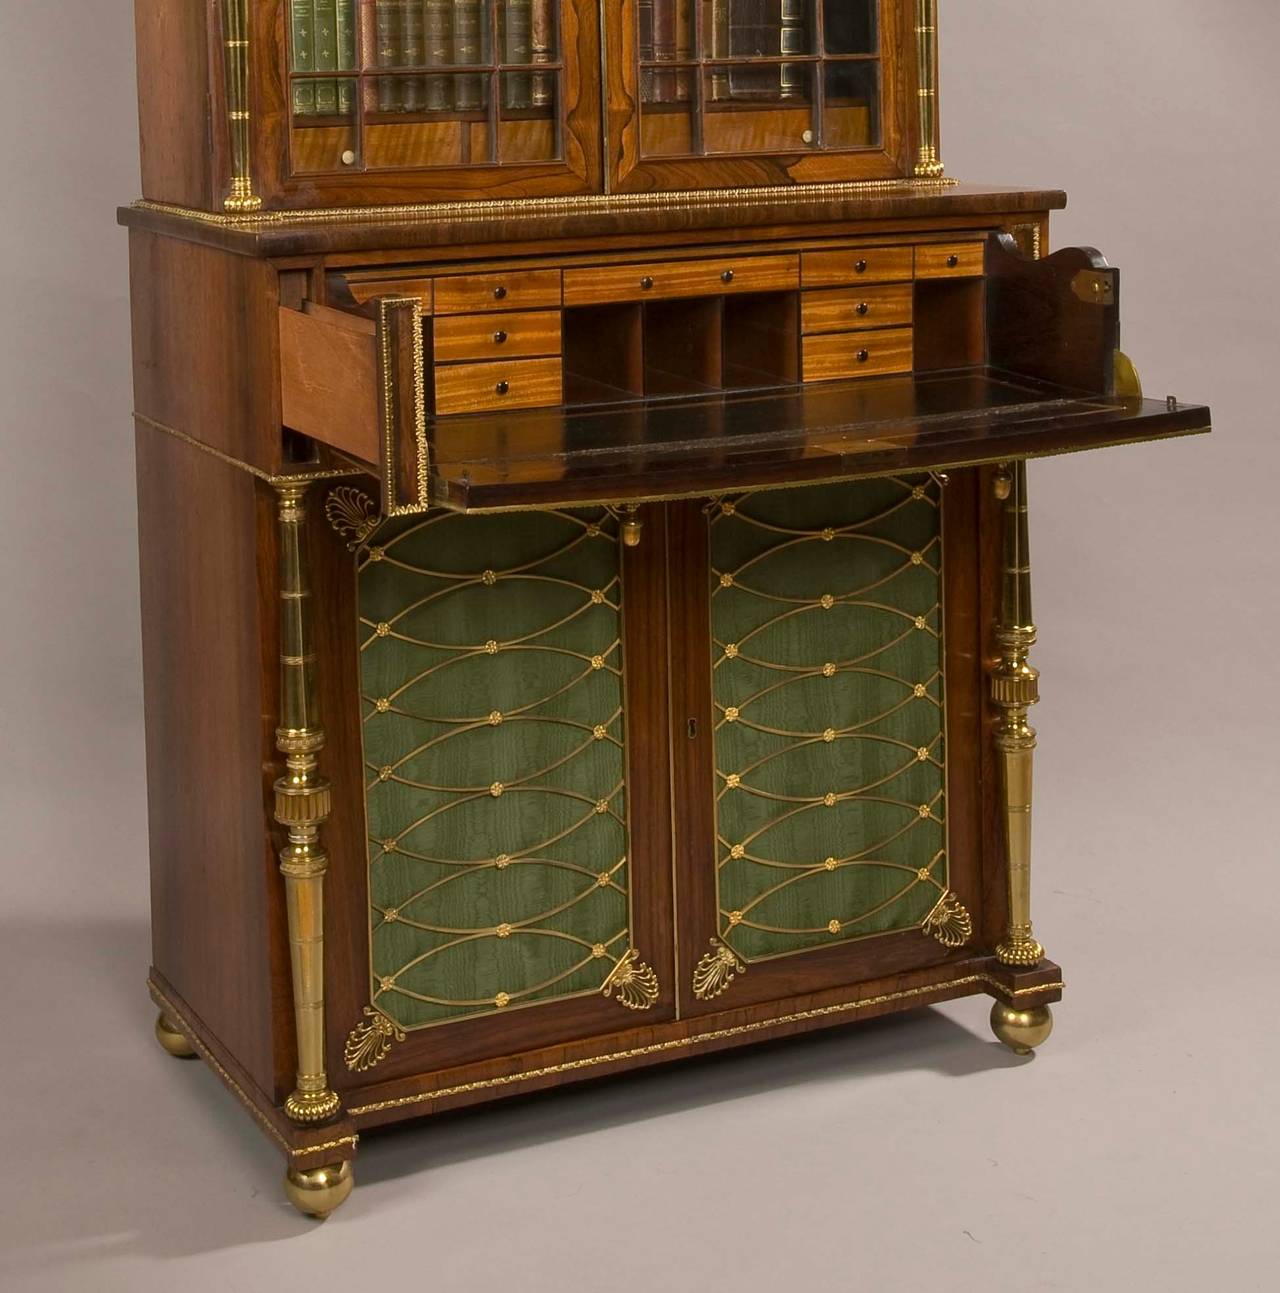 A Regency period secretaire bookcase attributed to John Mclean of London.

Constructed in a well figured goncalo alves, with extensive use of gilt brass accents. Rising from compressed ball brass feet, the lower section consists of two blind